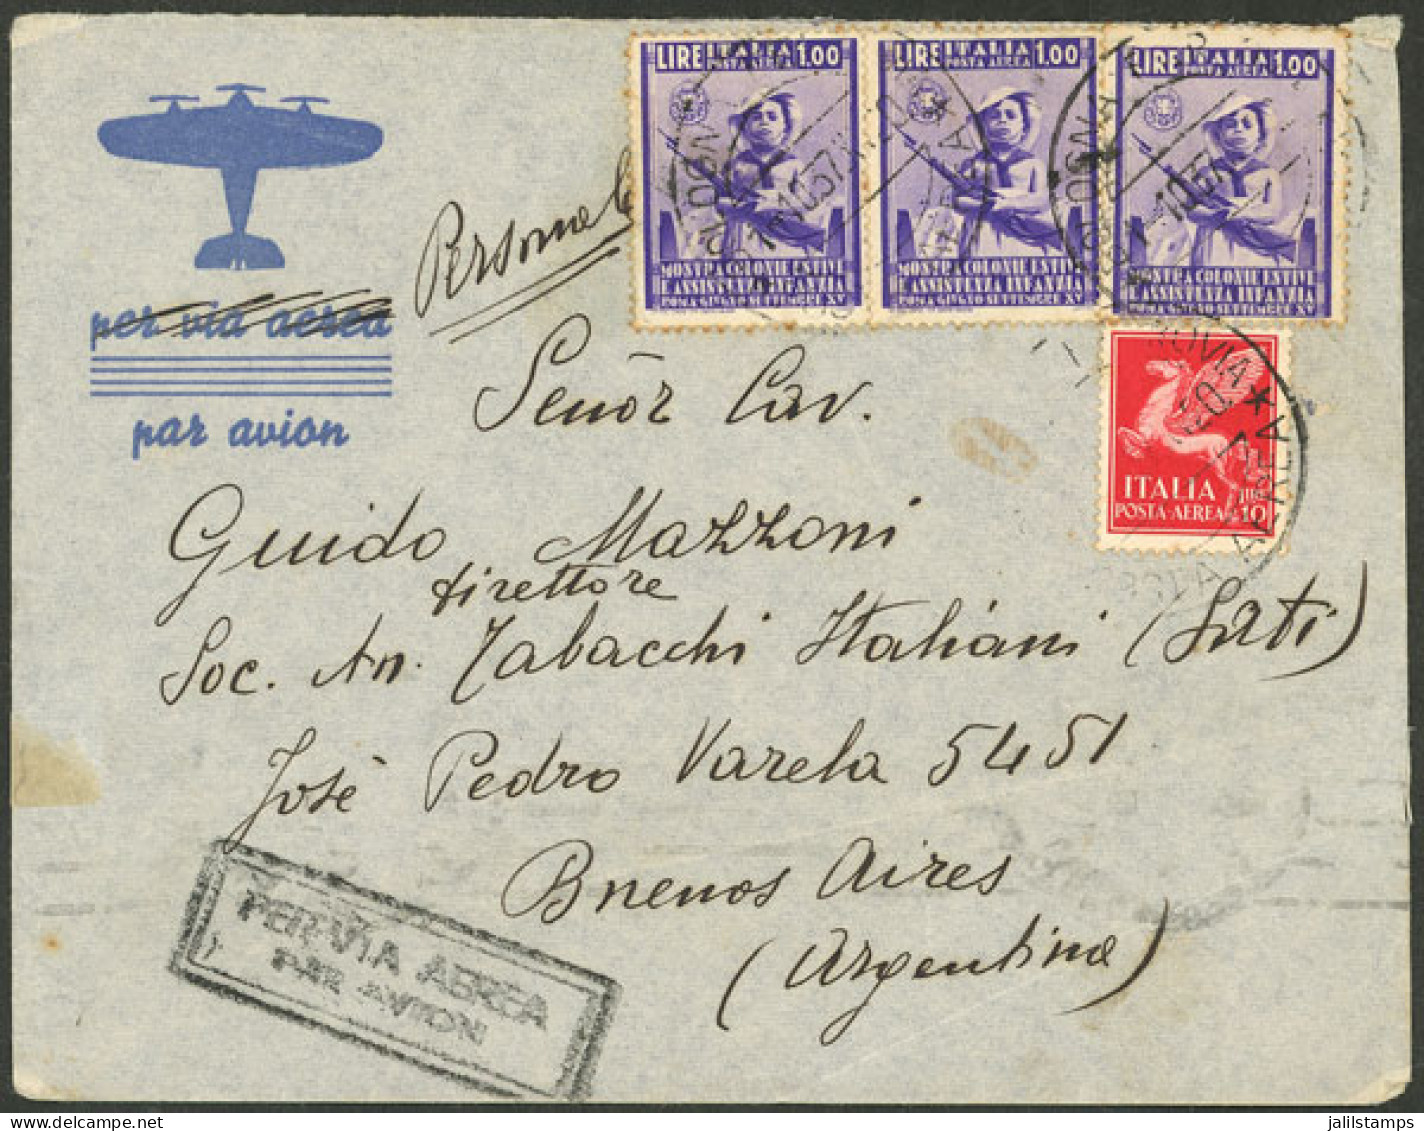 ITALY: 1/OC/1937 Bologna - Argentina, Airmail Cover Franked With 13L. Including 3x 1L. "Summer Colonies, Children" (Sc.C - Unclassified